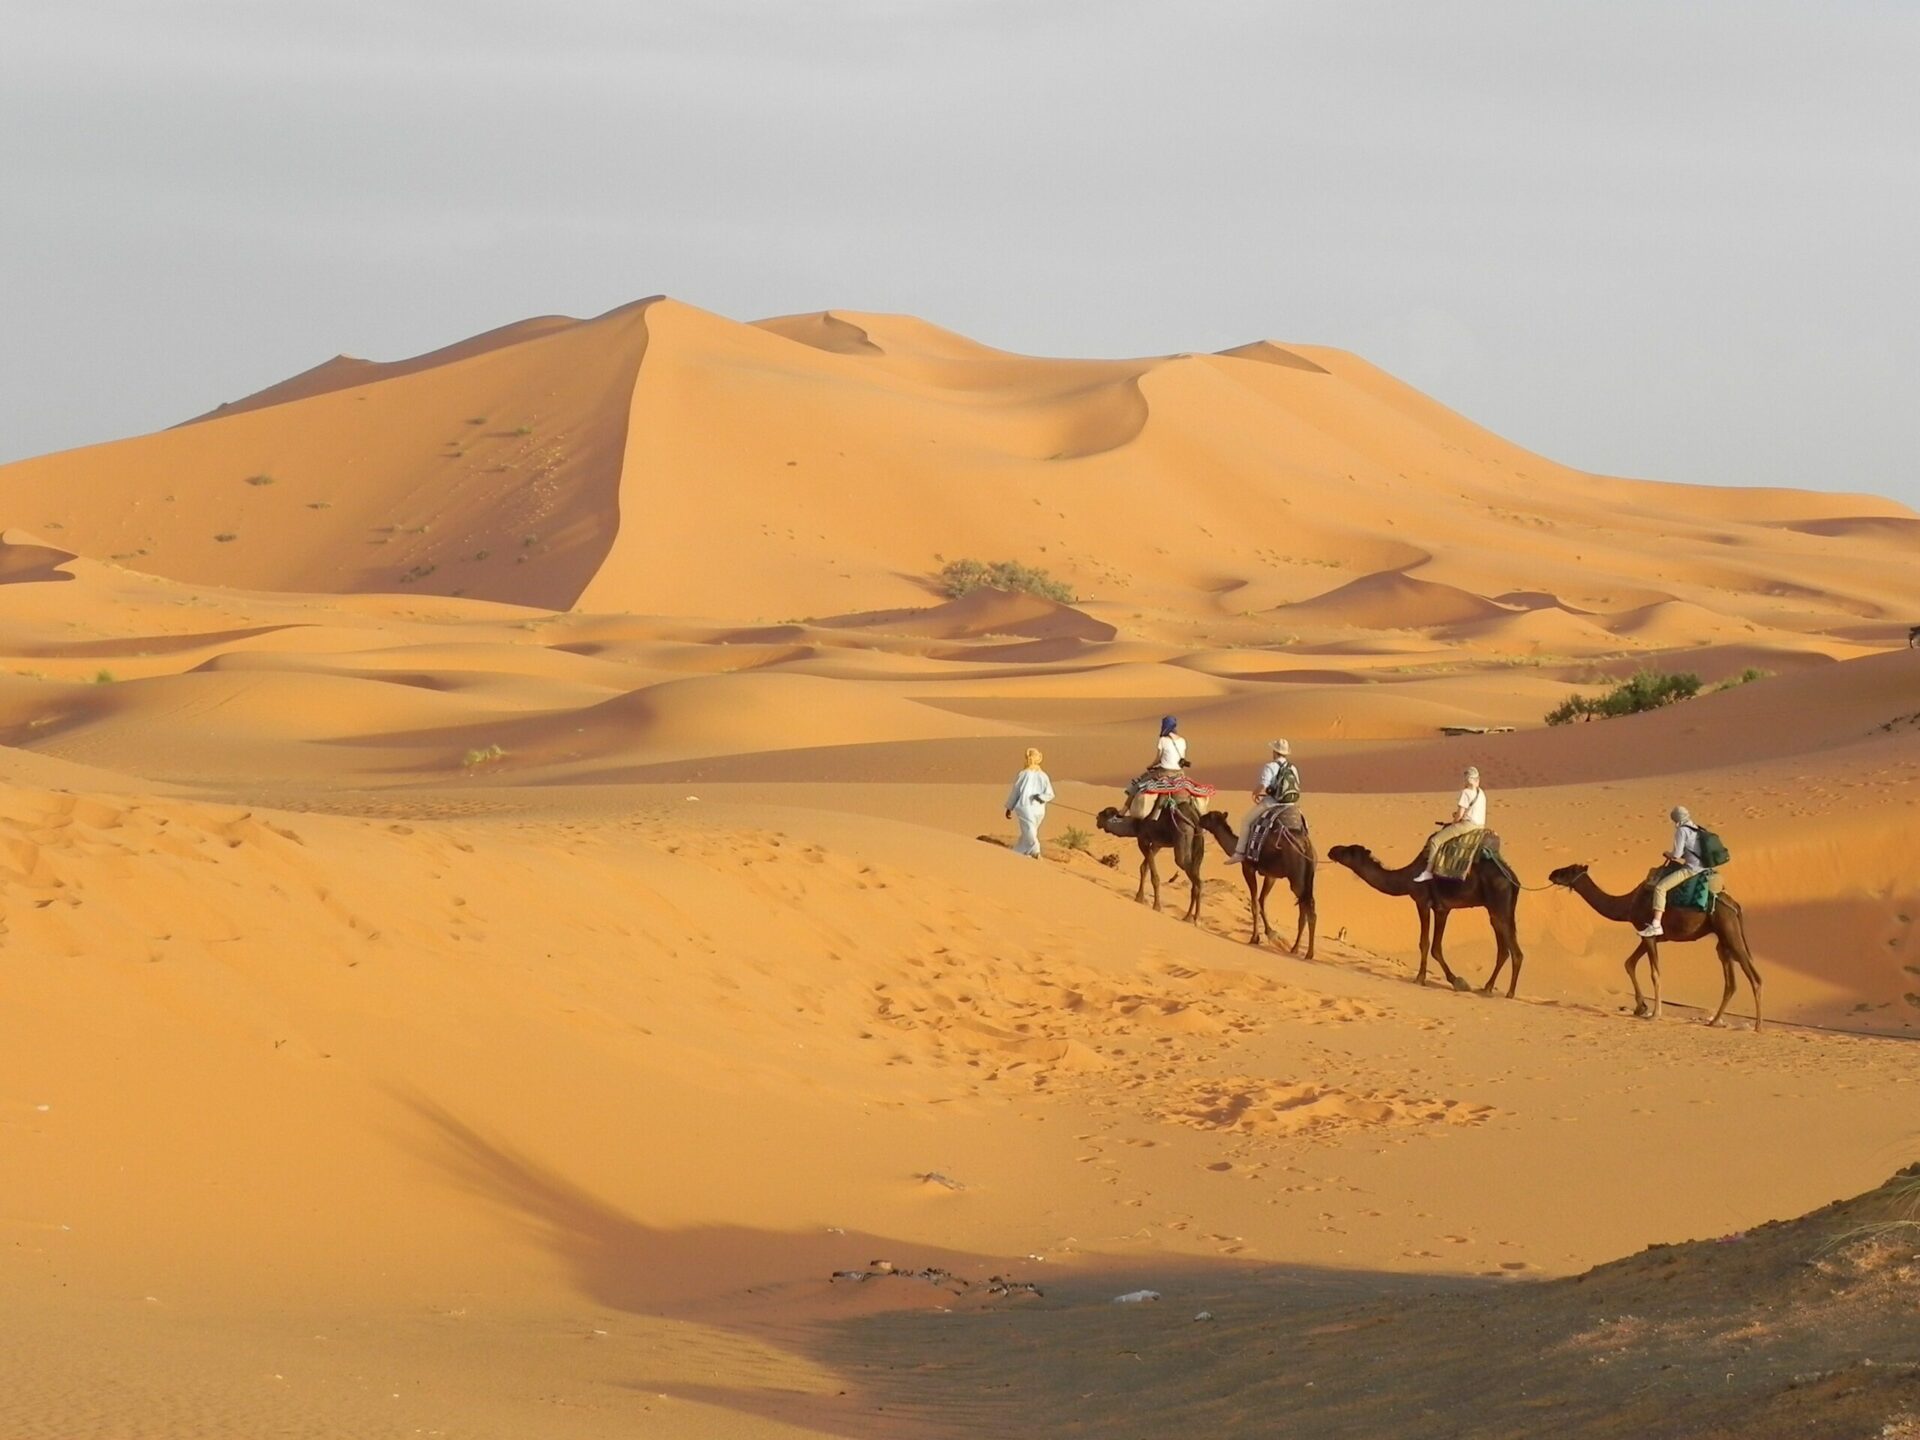 Camel ride in the Sahara is one of many things to do in Morocco